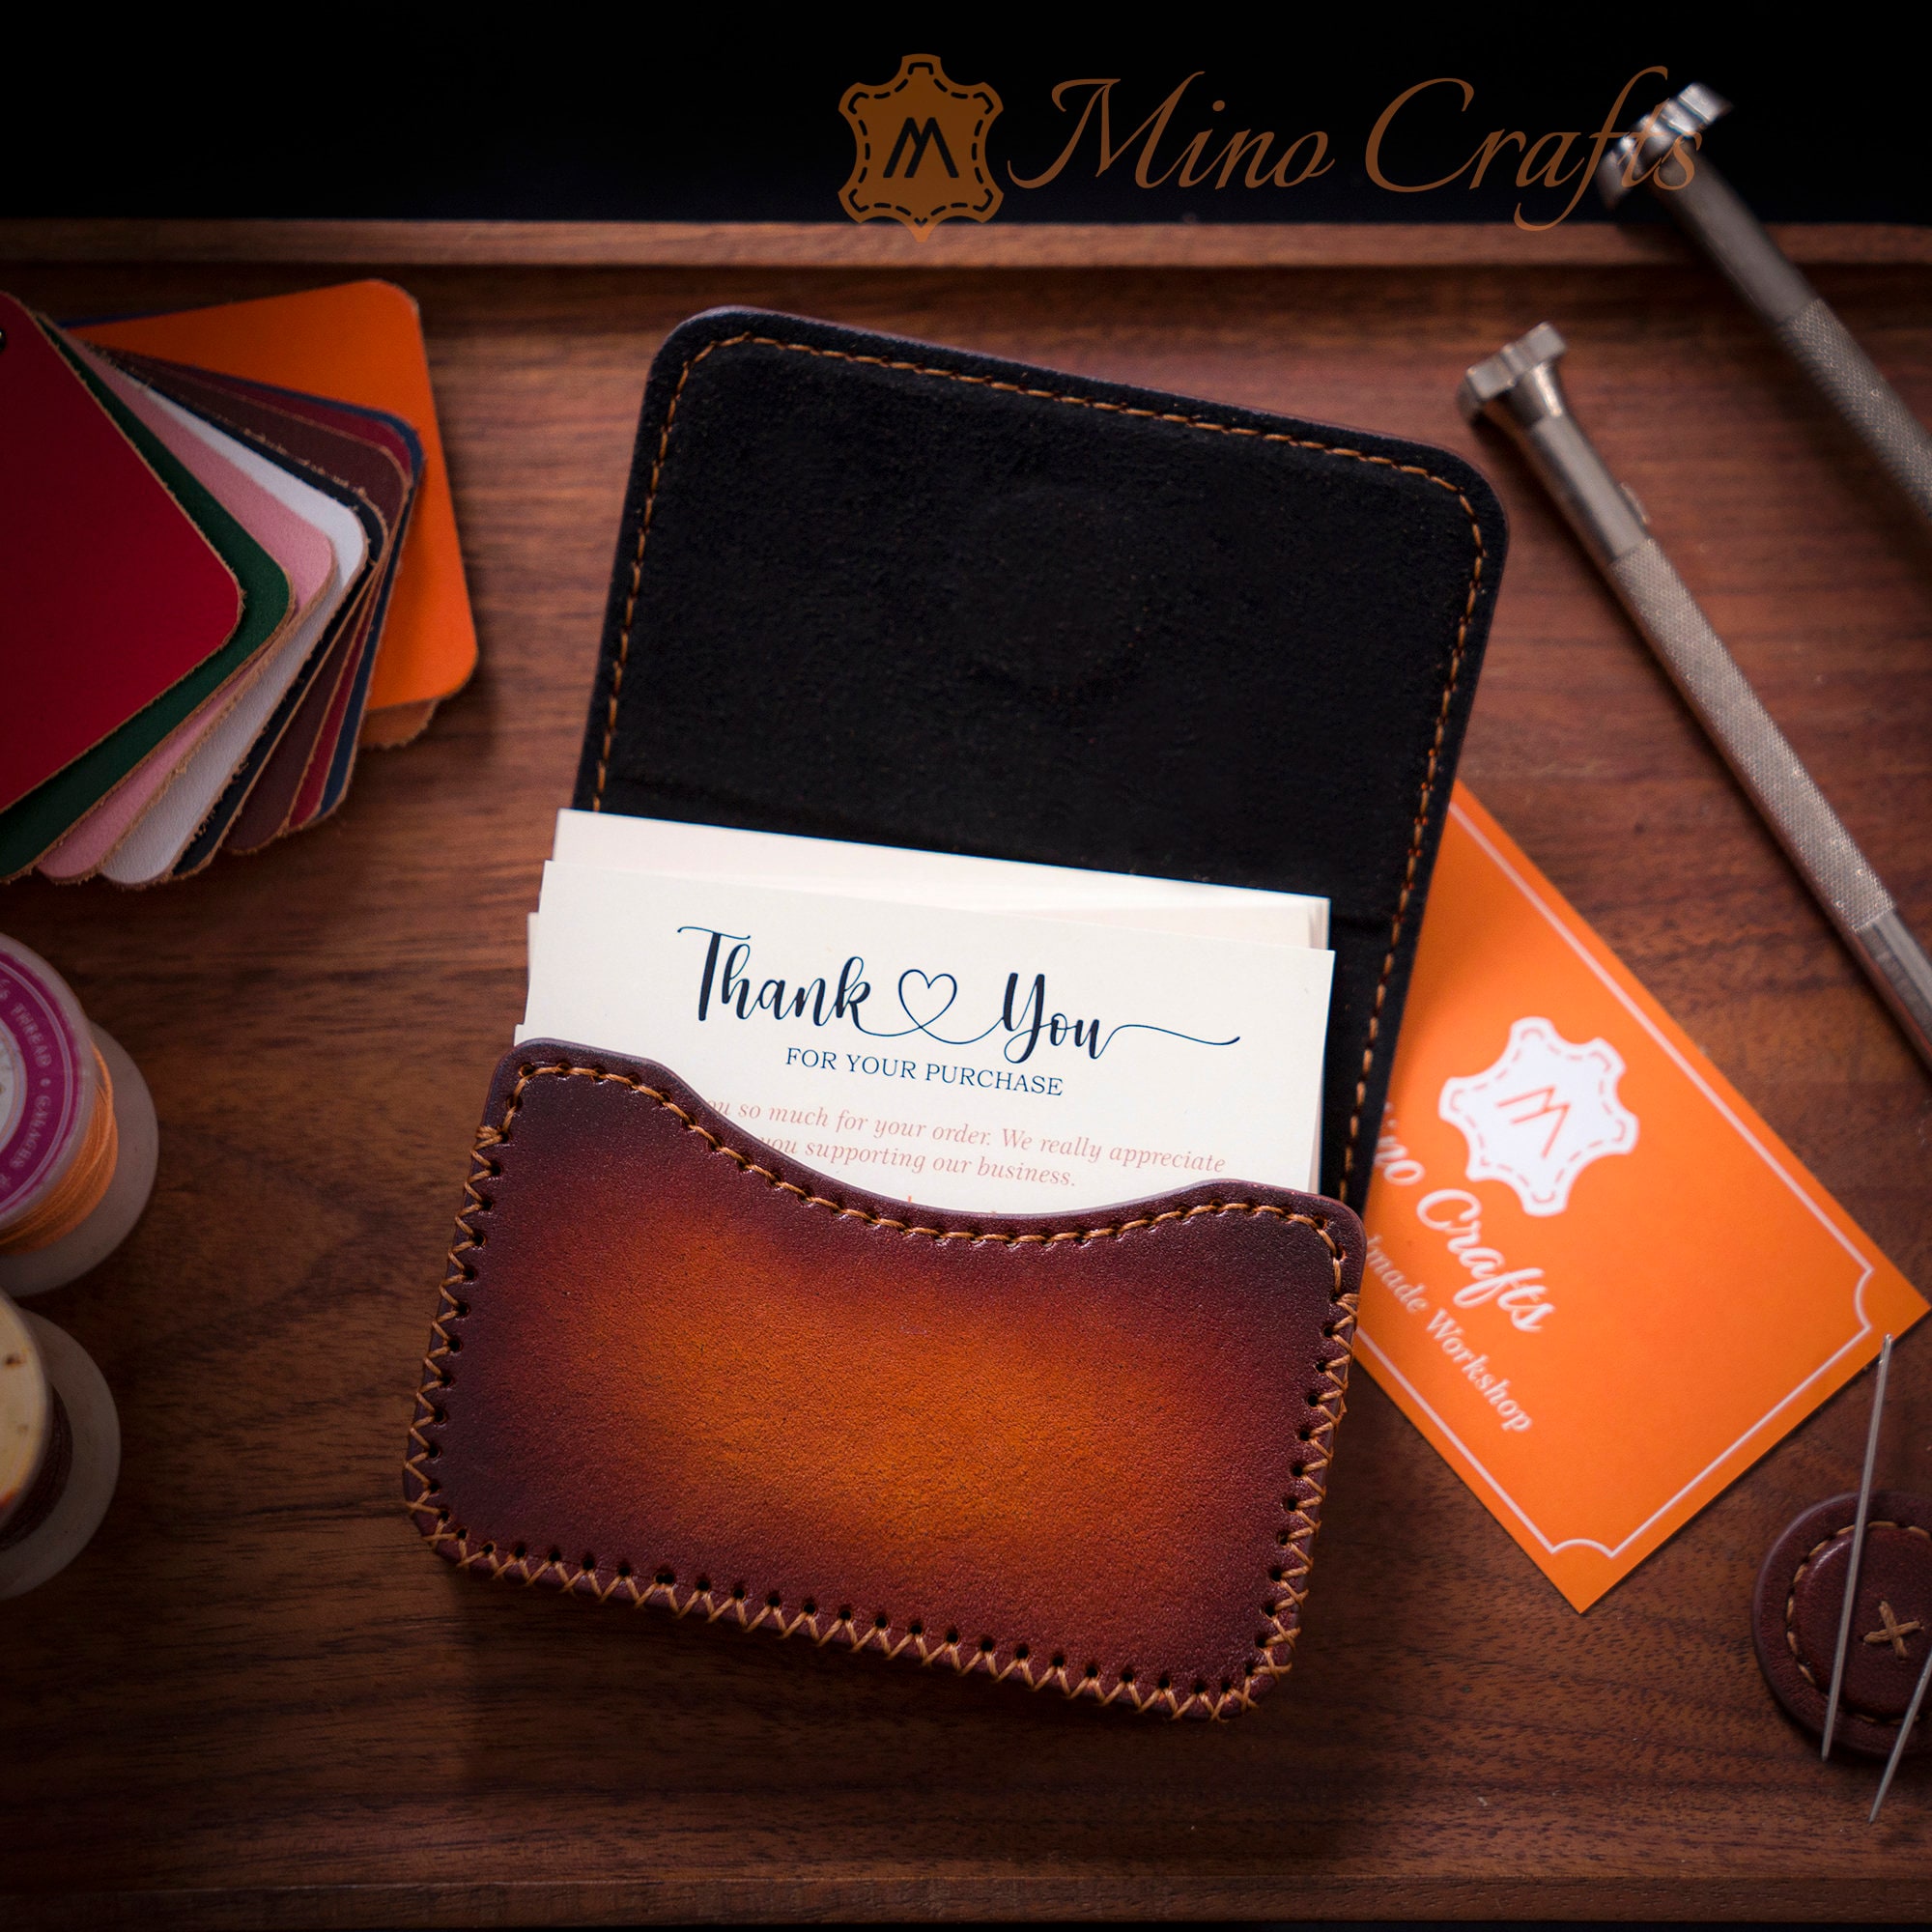 Cattle male Real leather Credit Card Cash Bill Holder Magnet Money